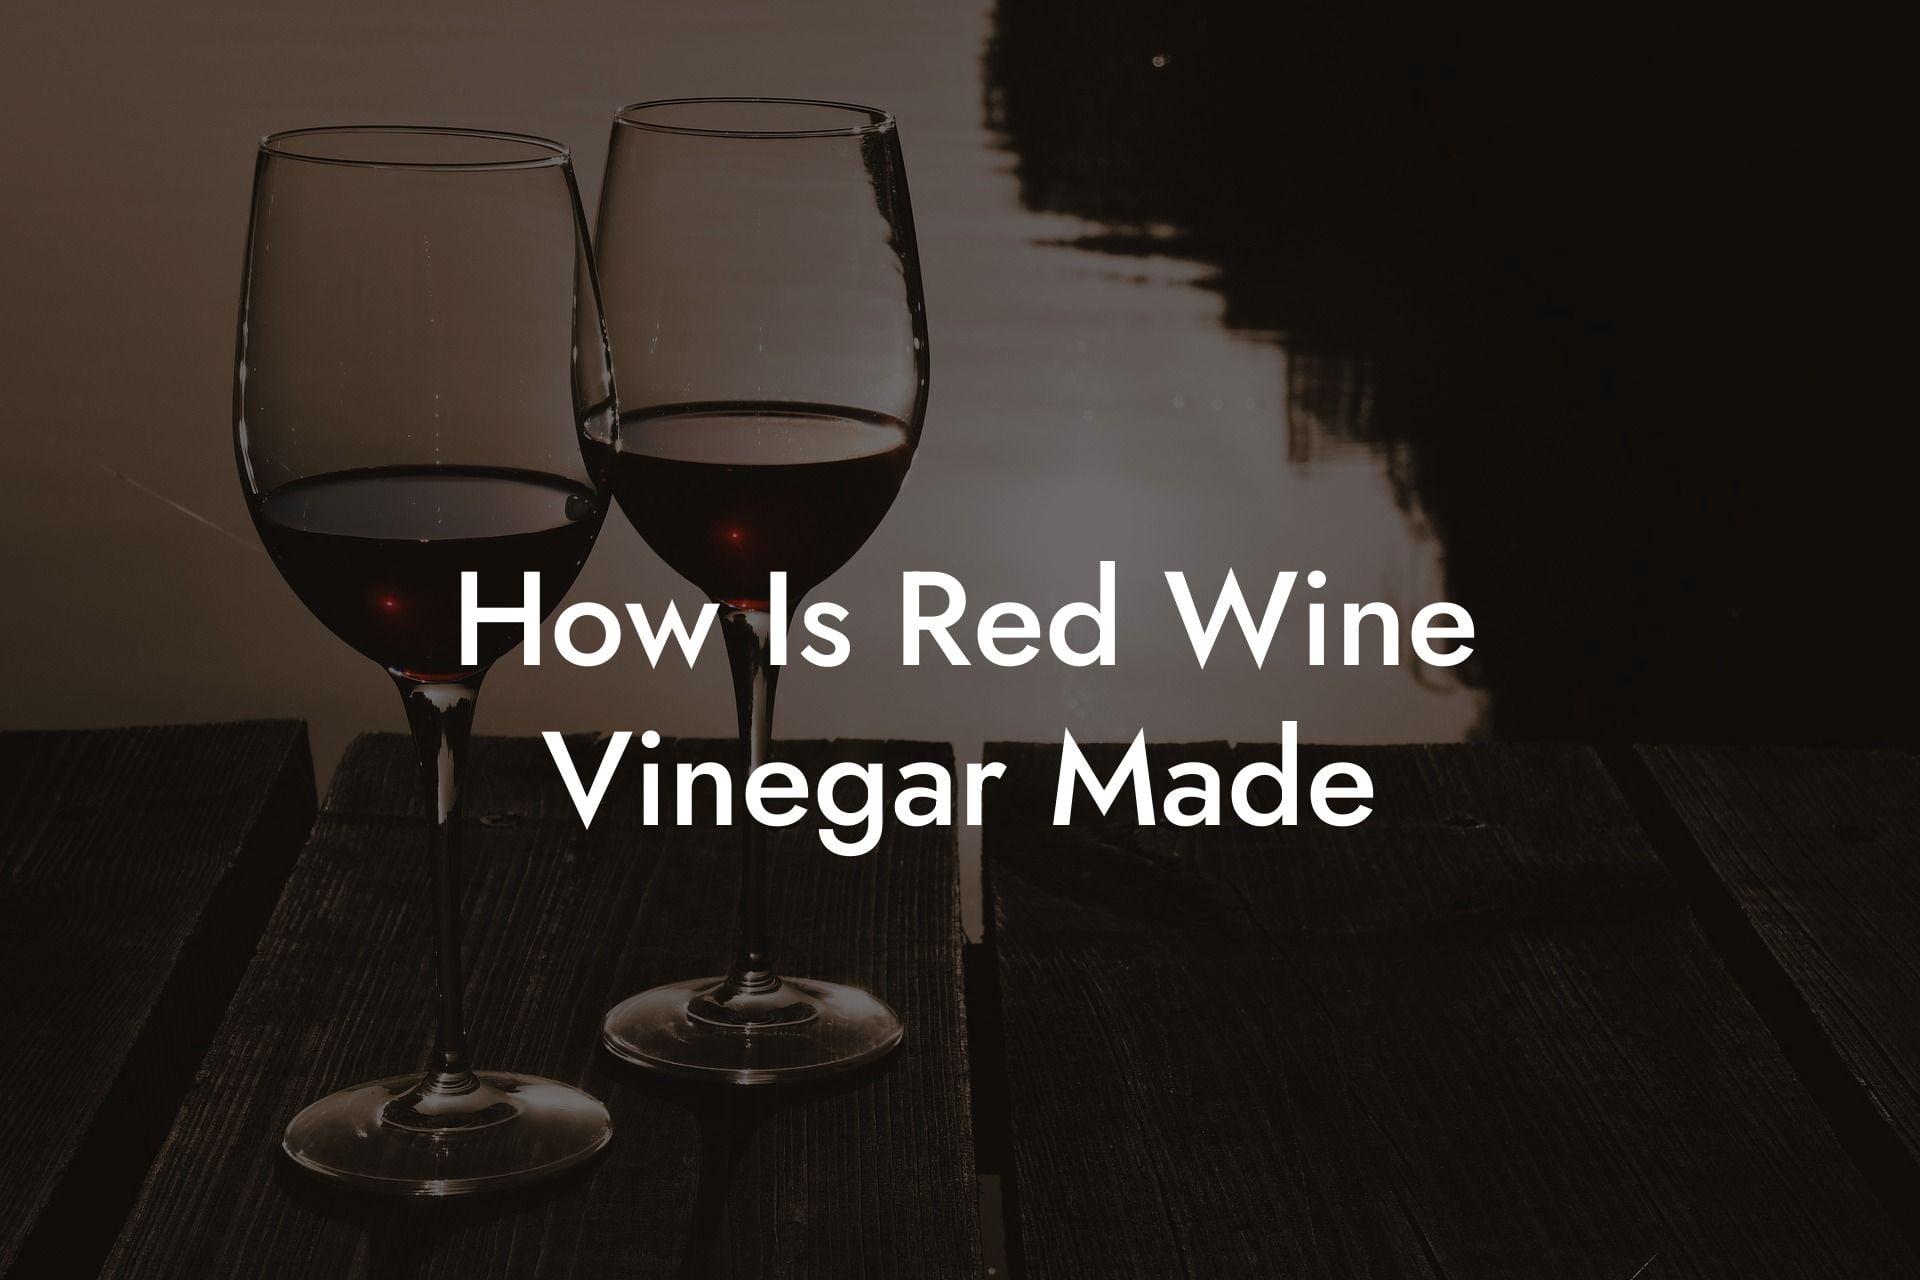 How Is Red Wine Vinegar Made